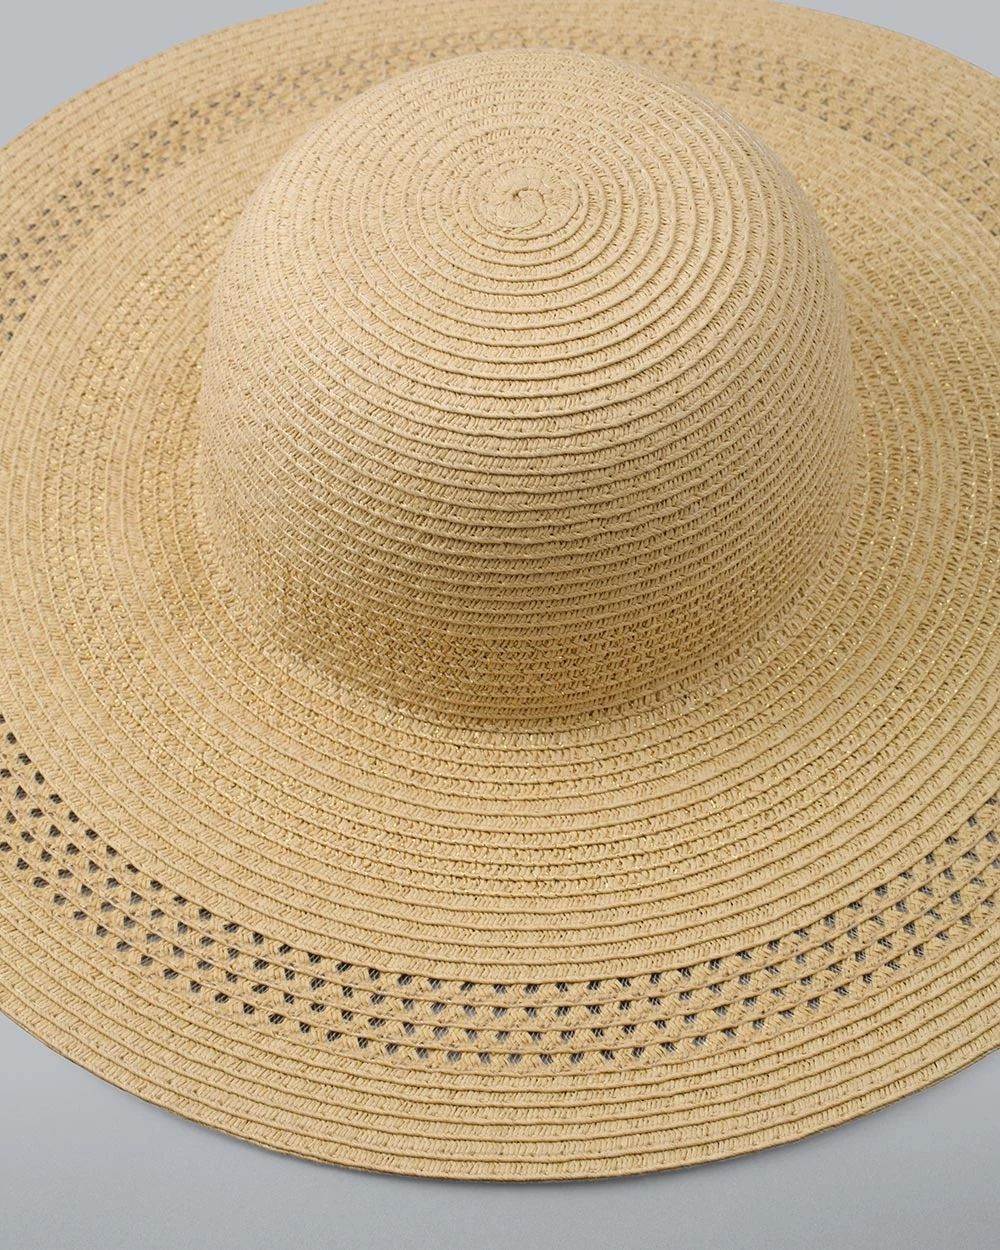 Floppy Straw Hat click to view larger image.